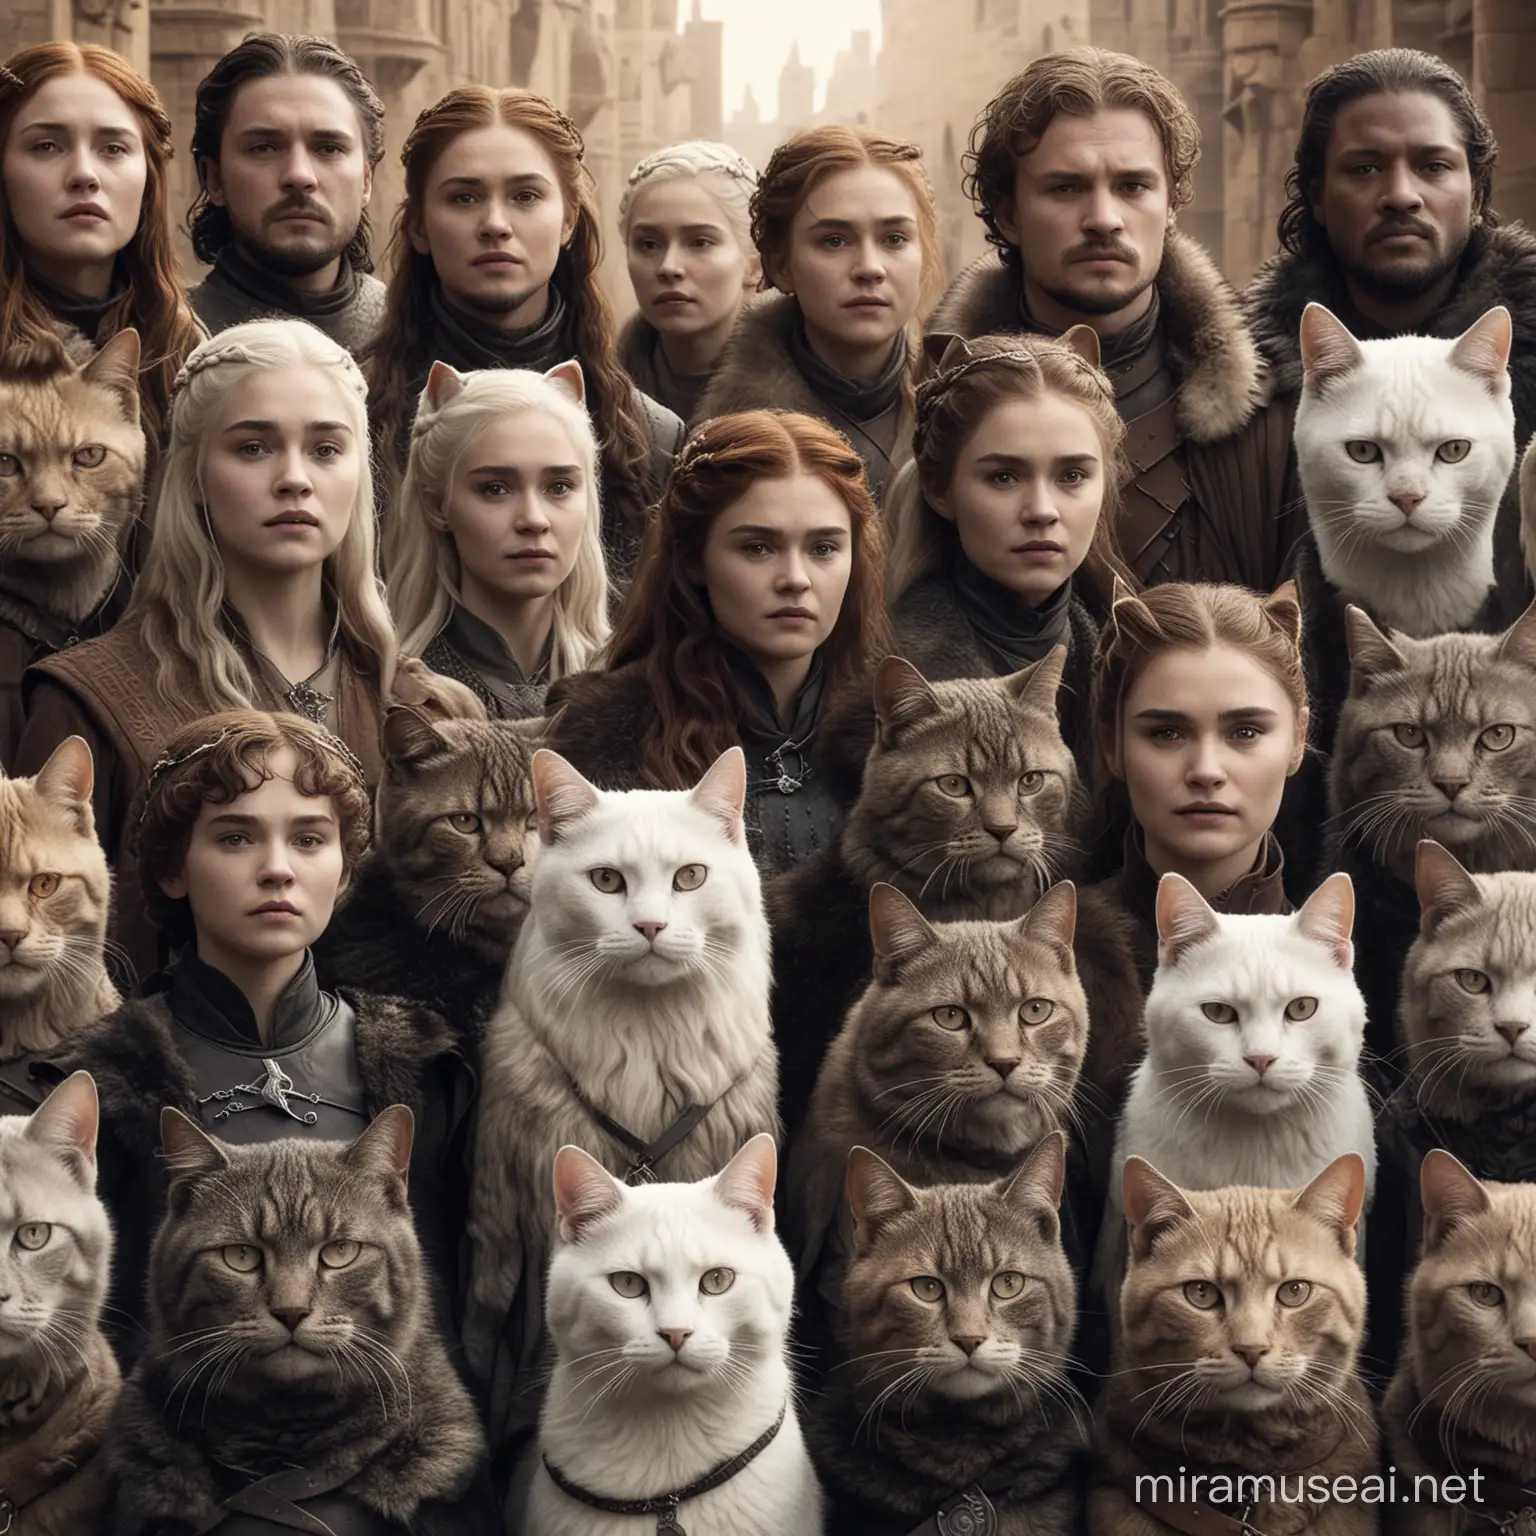 a scene from Game of Thrones starring only humans with cat faces